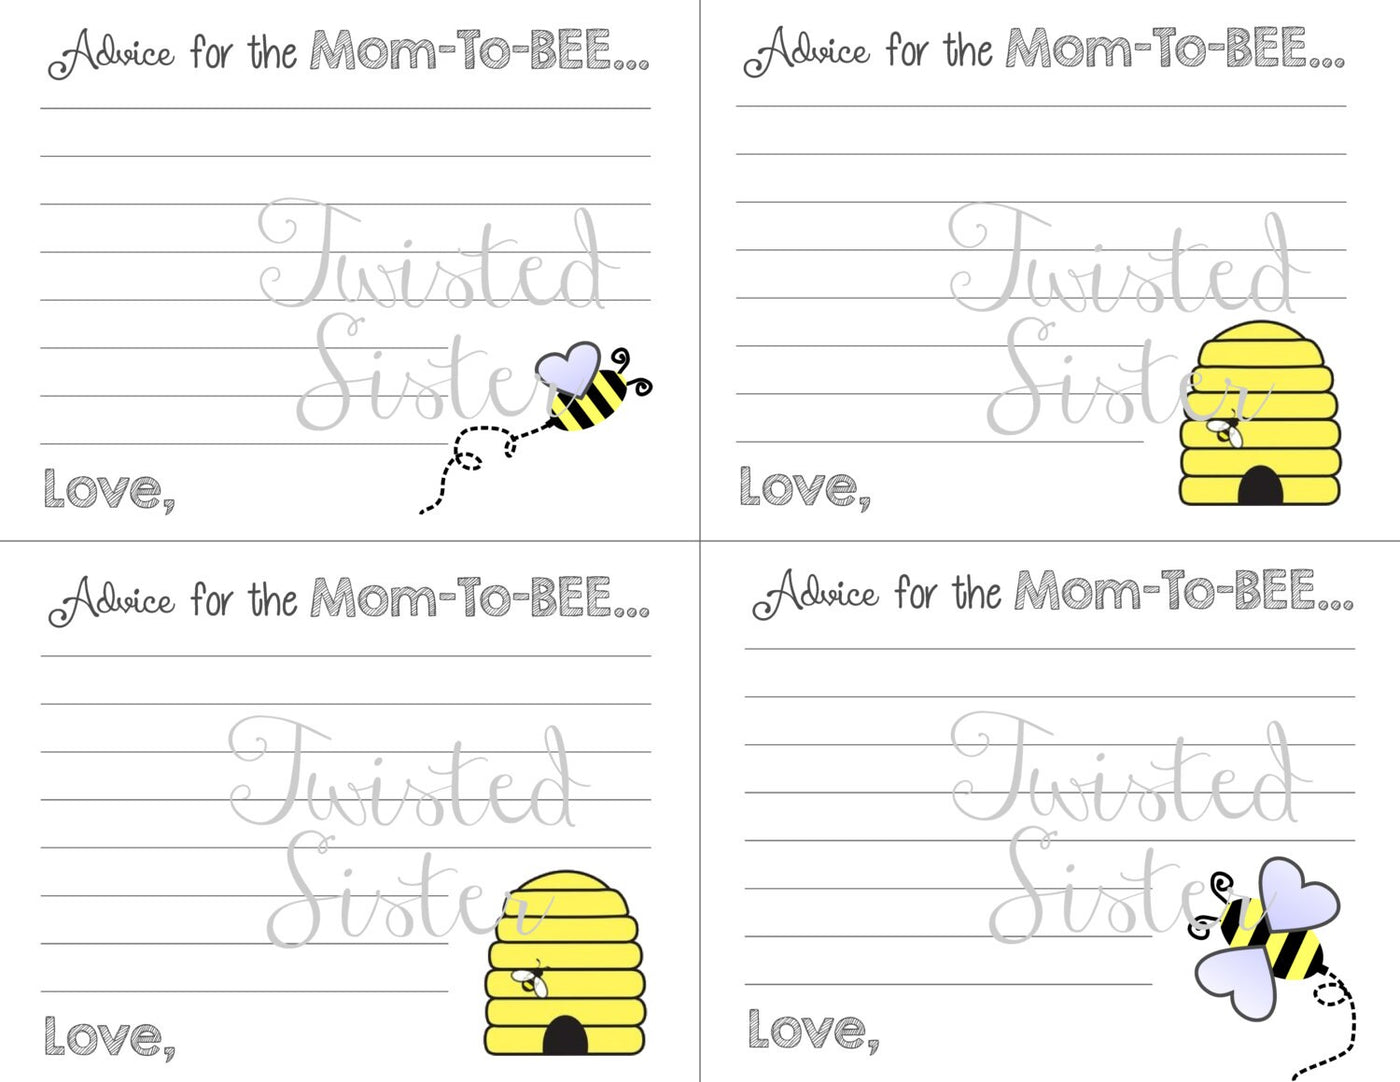 Baby Shower Games, What Will It BEE Baby Shower Games, Advice for the Mom to BEE, Bumblebee baby shower decor, Advice Cards for Baby Shower